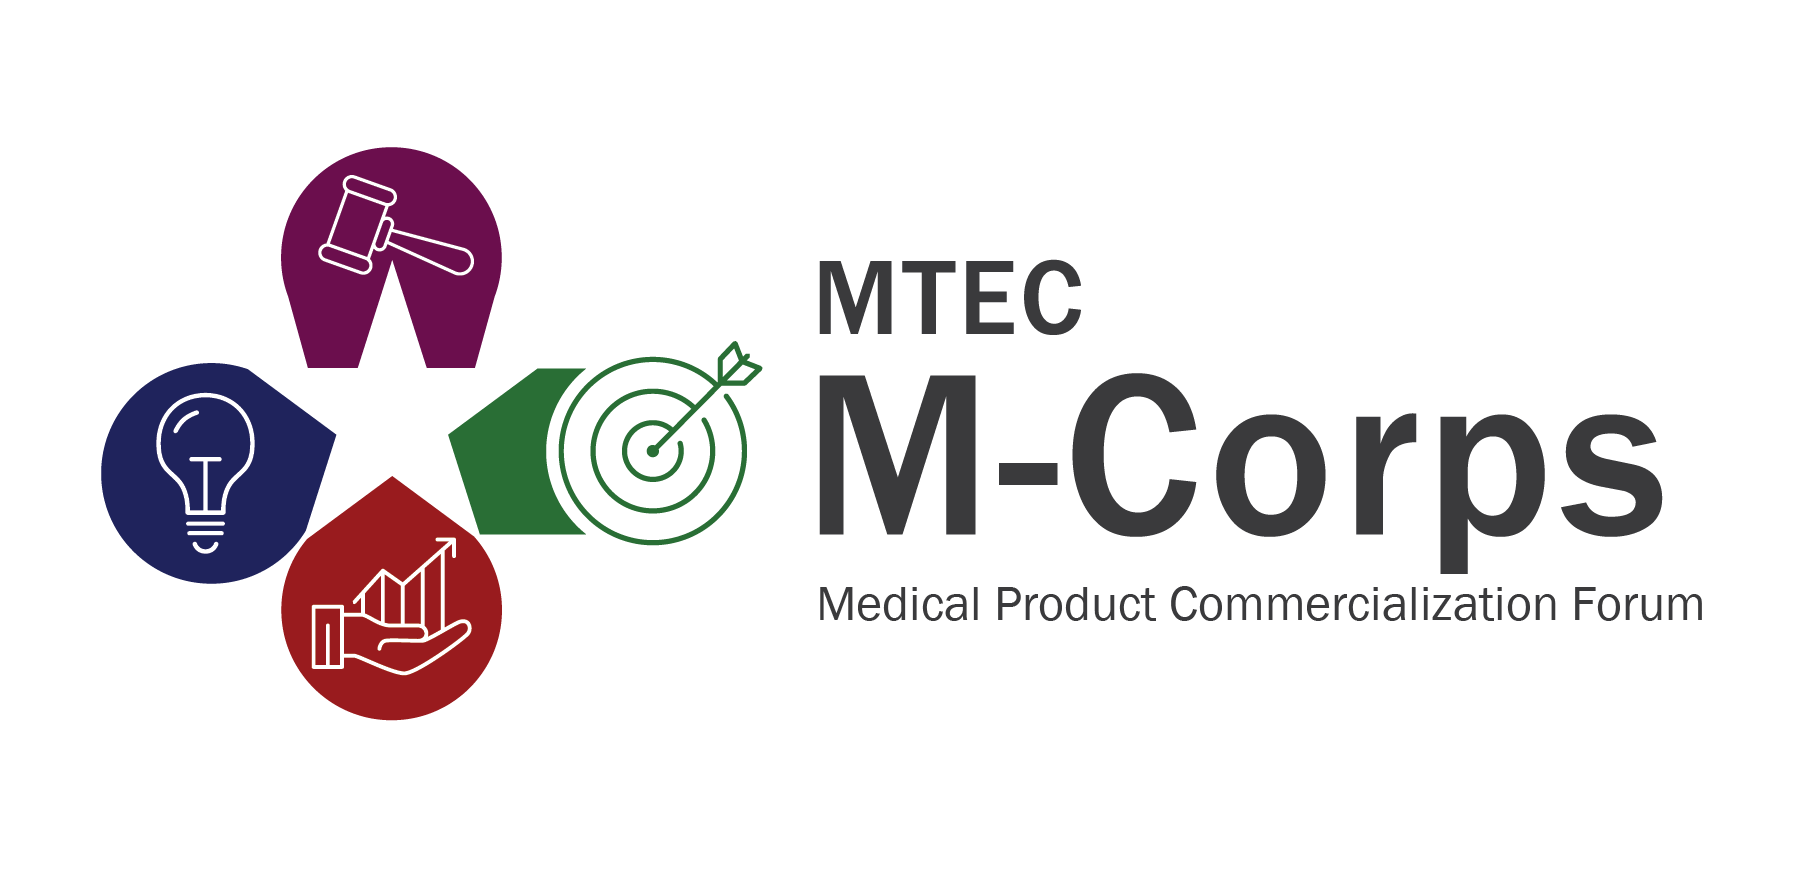 MTEC M-Corps: Medical Product Commercialization Forum